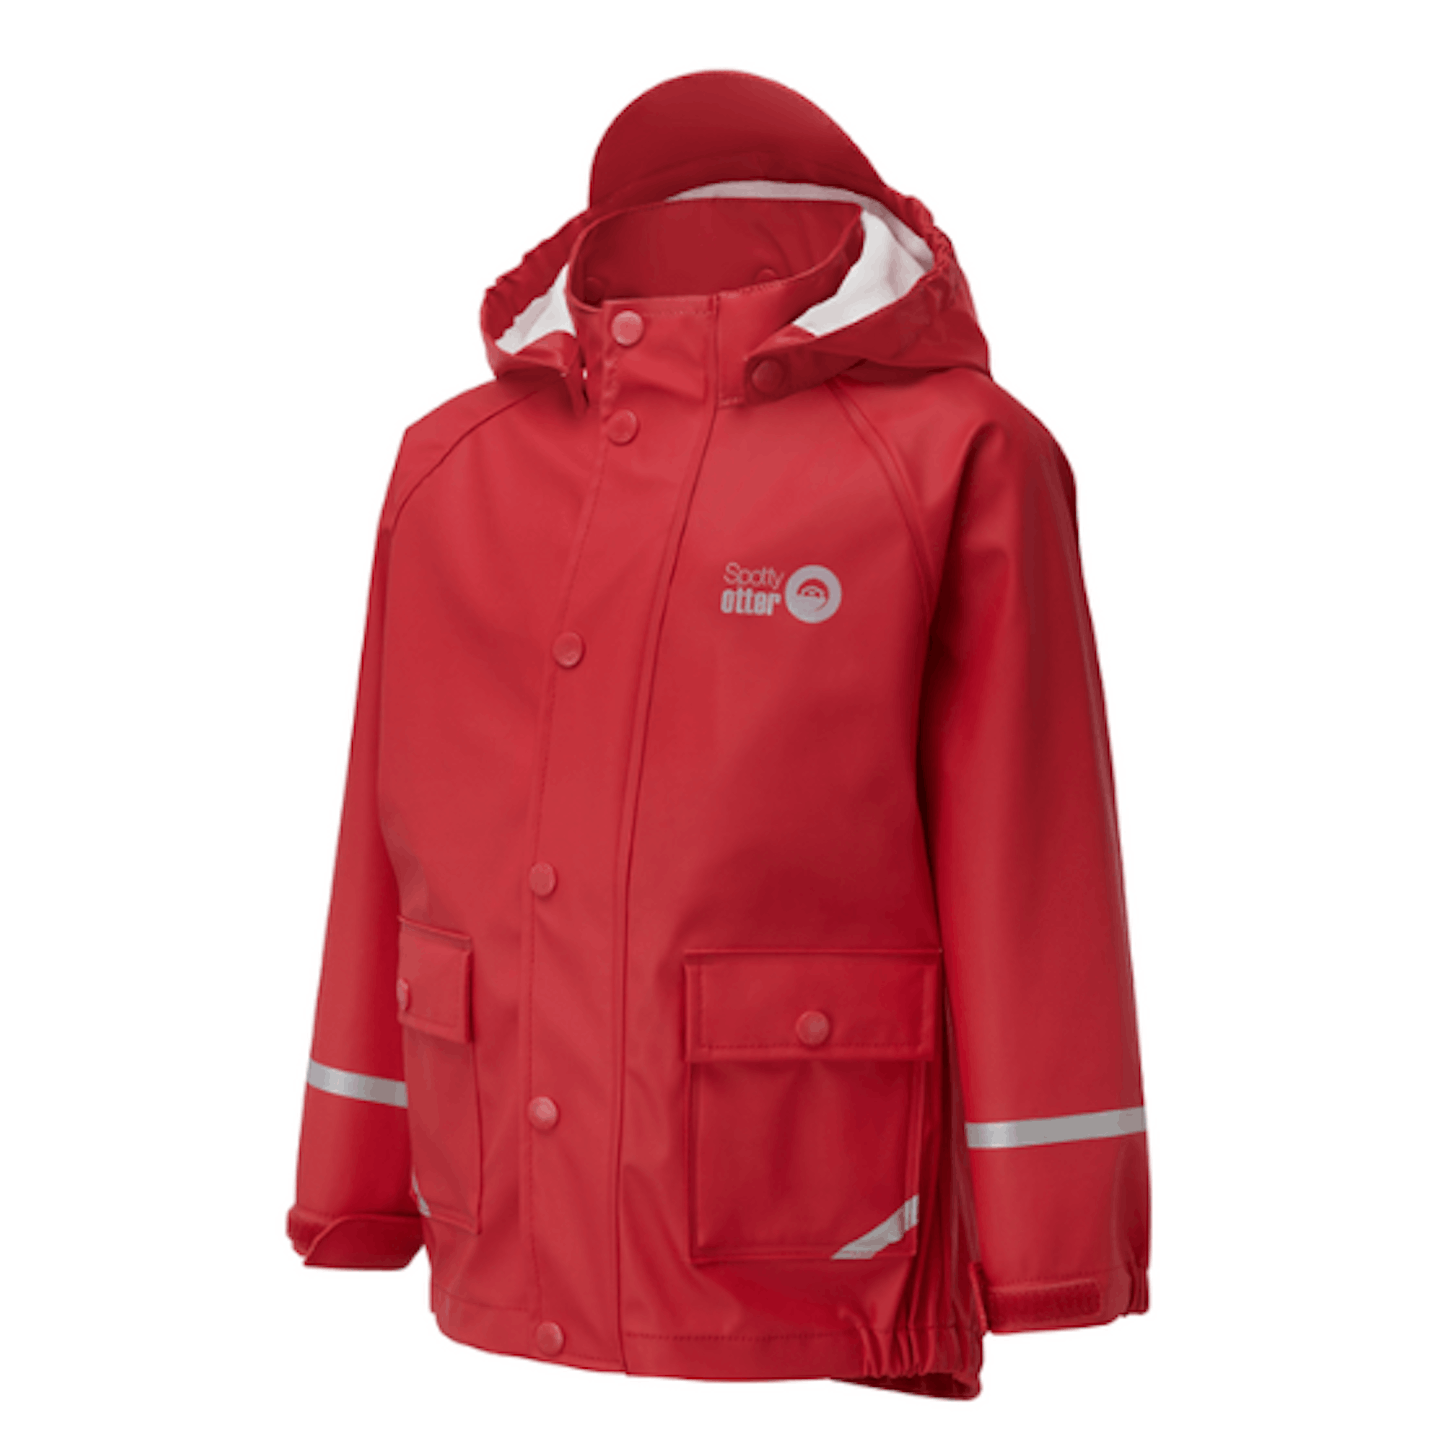 Red raincoat for kids with a capped hood to keep rain off the face